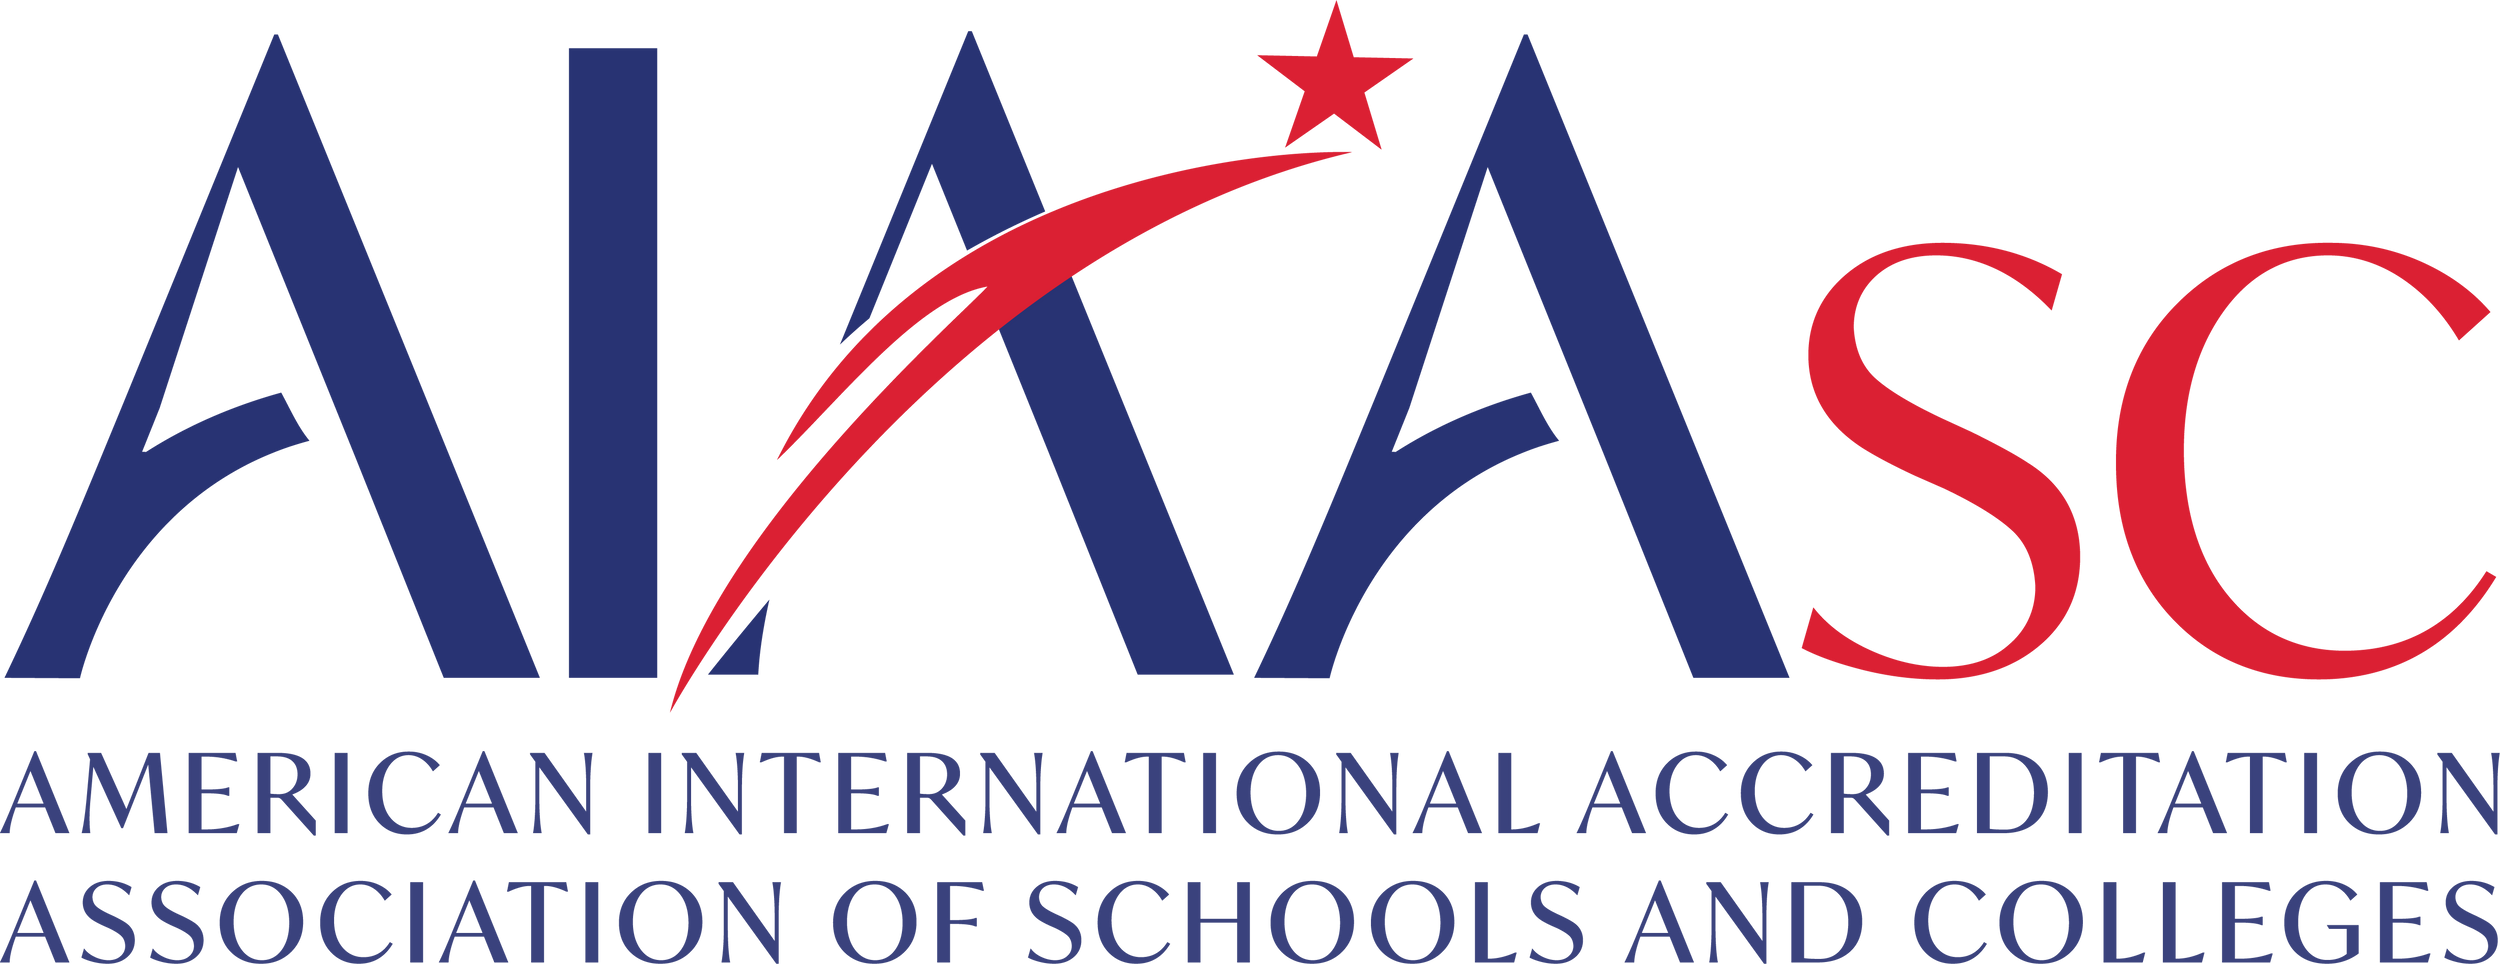 American International Accreditation Association of Schools and Colleges